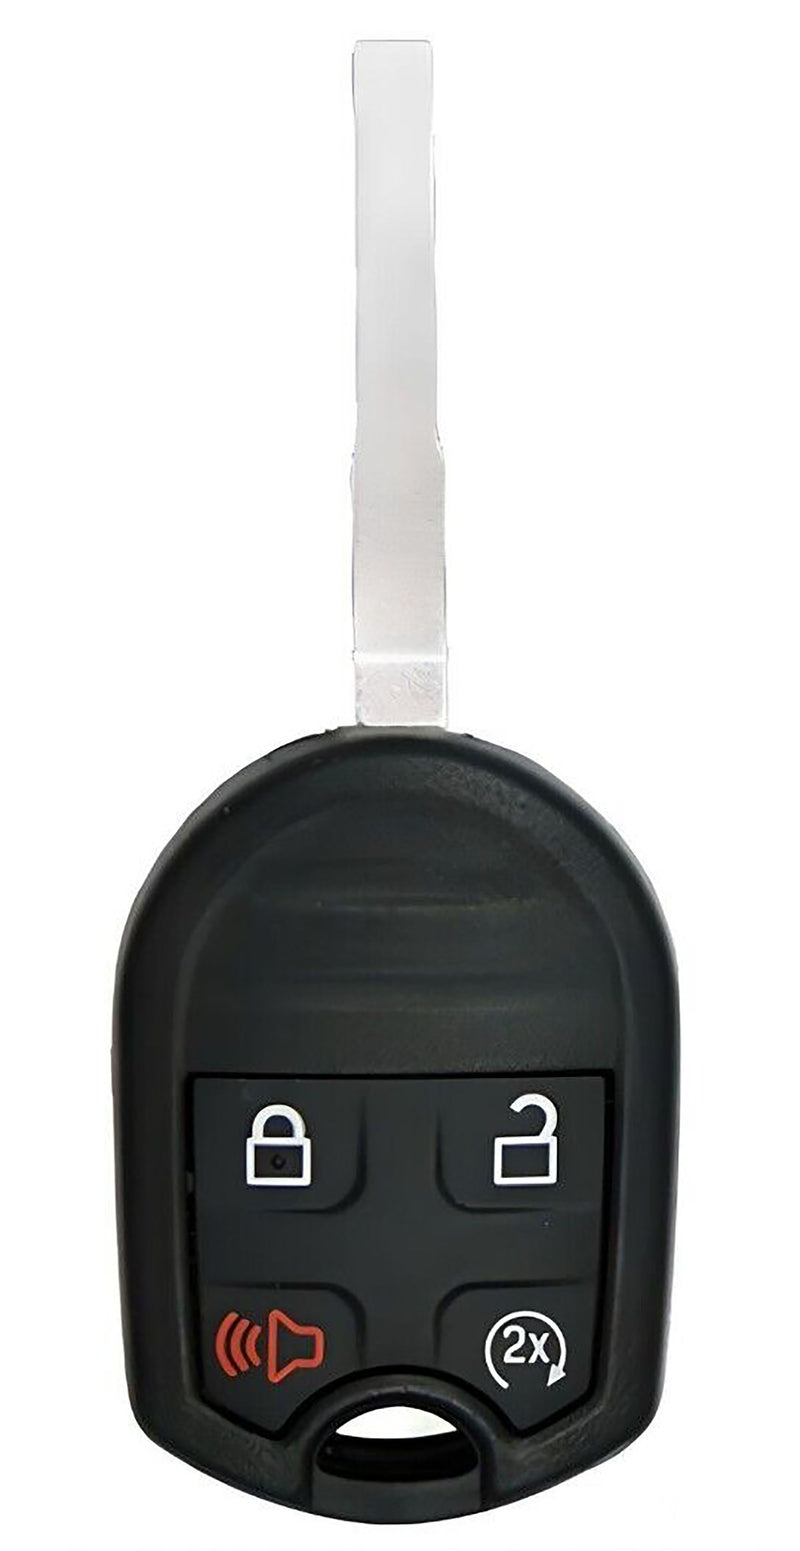 1x New Replacement Key Fob Compatible with & Fit For Ford Vehicles 315 MHz - MPN CWTWB1U793-F-06